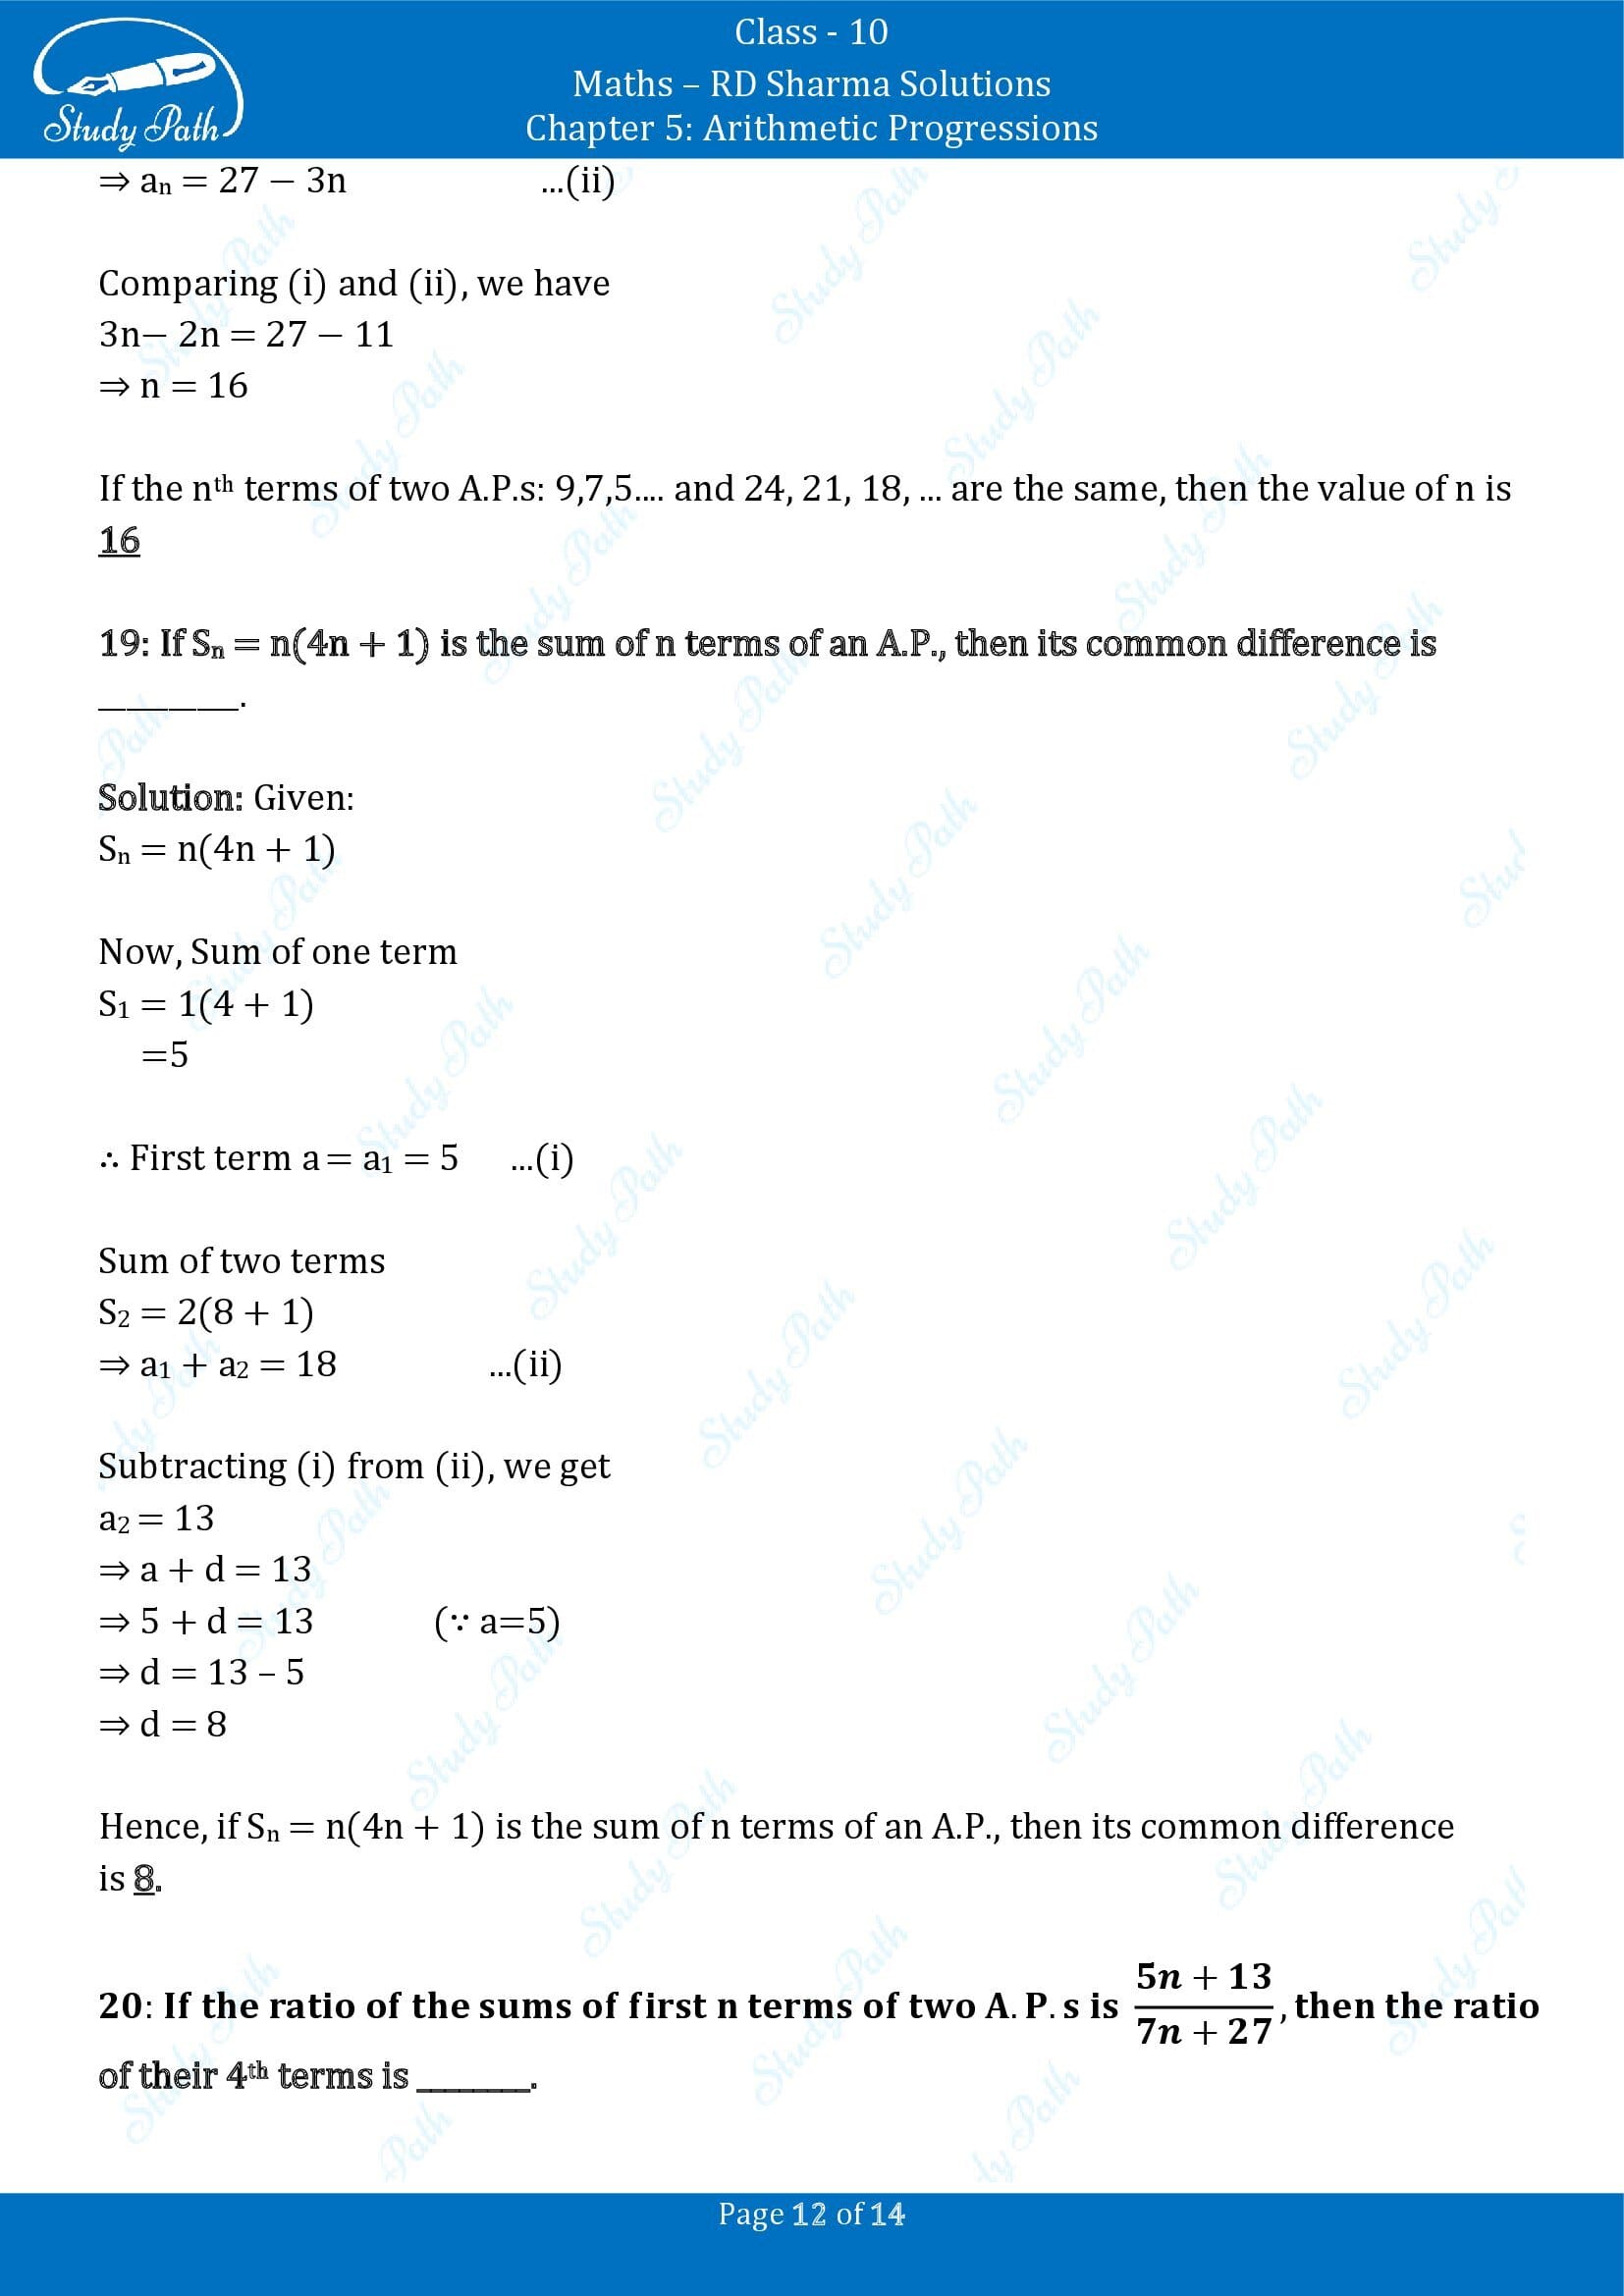 RD Sharma Solutions Class 10 Chapter 5 Arithmetic Progressions Fill in the Blank Type Questions FBQs 00012